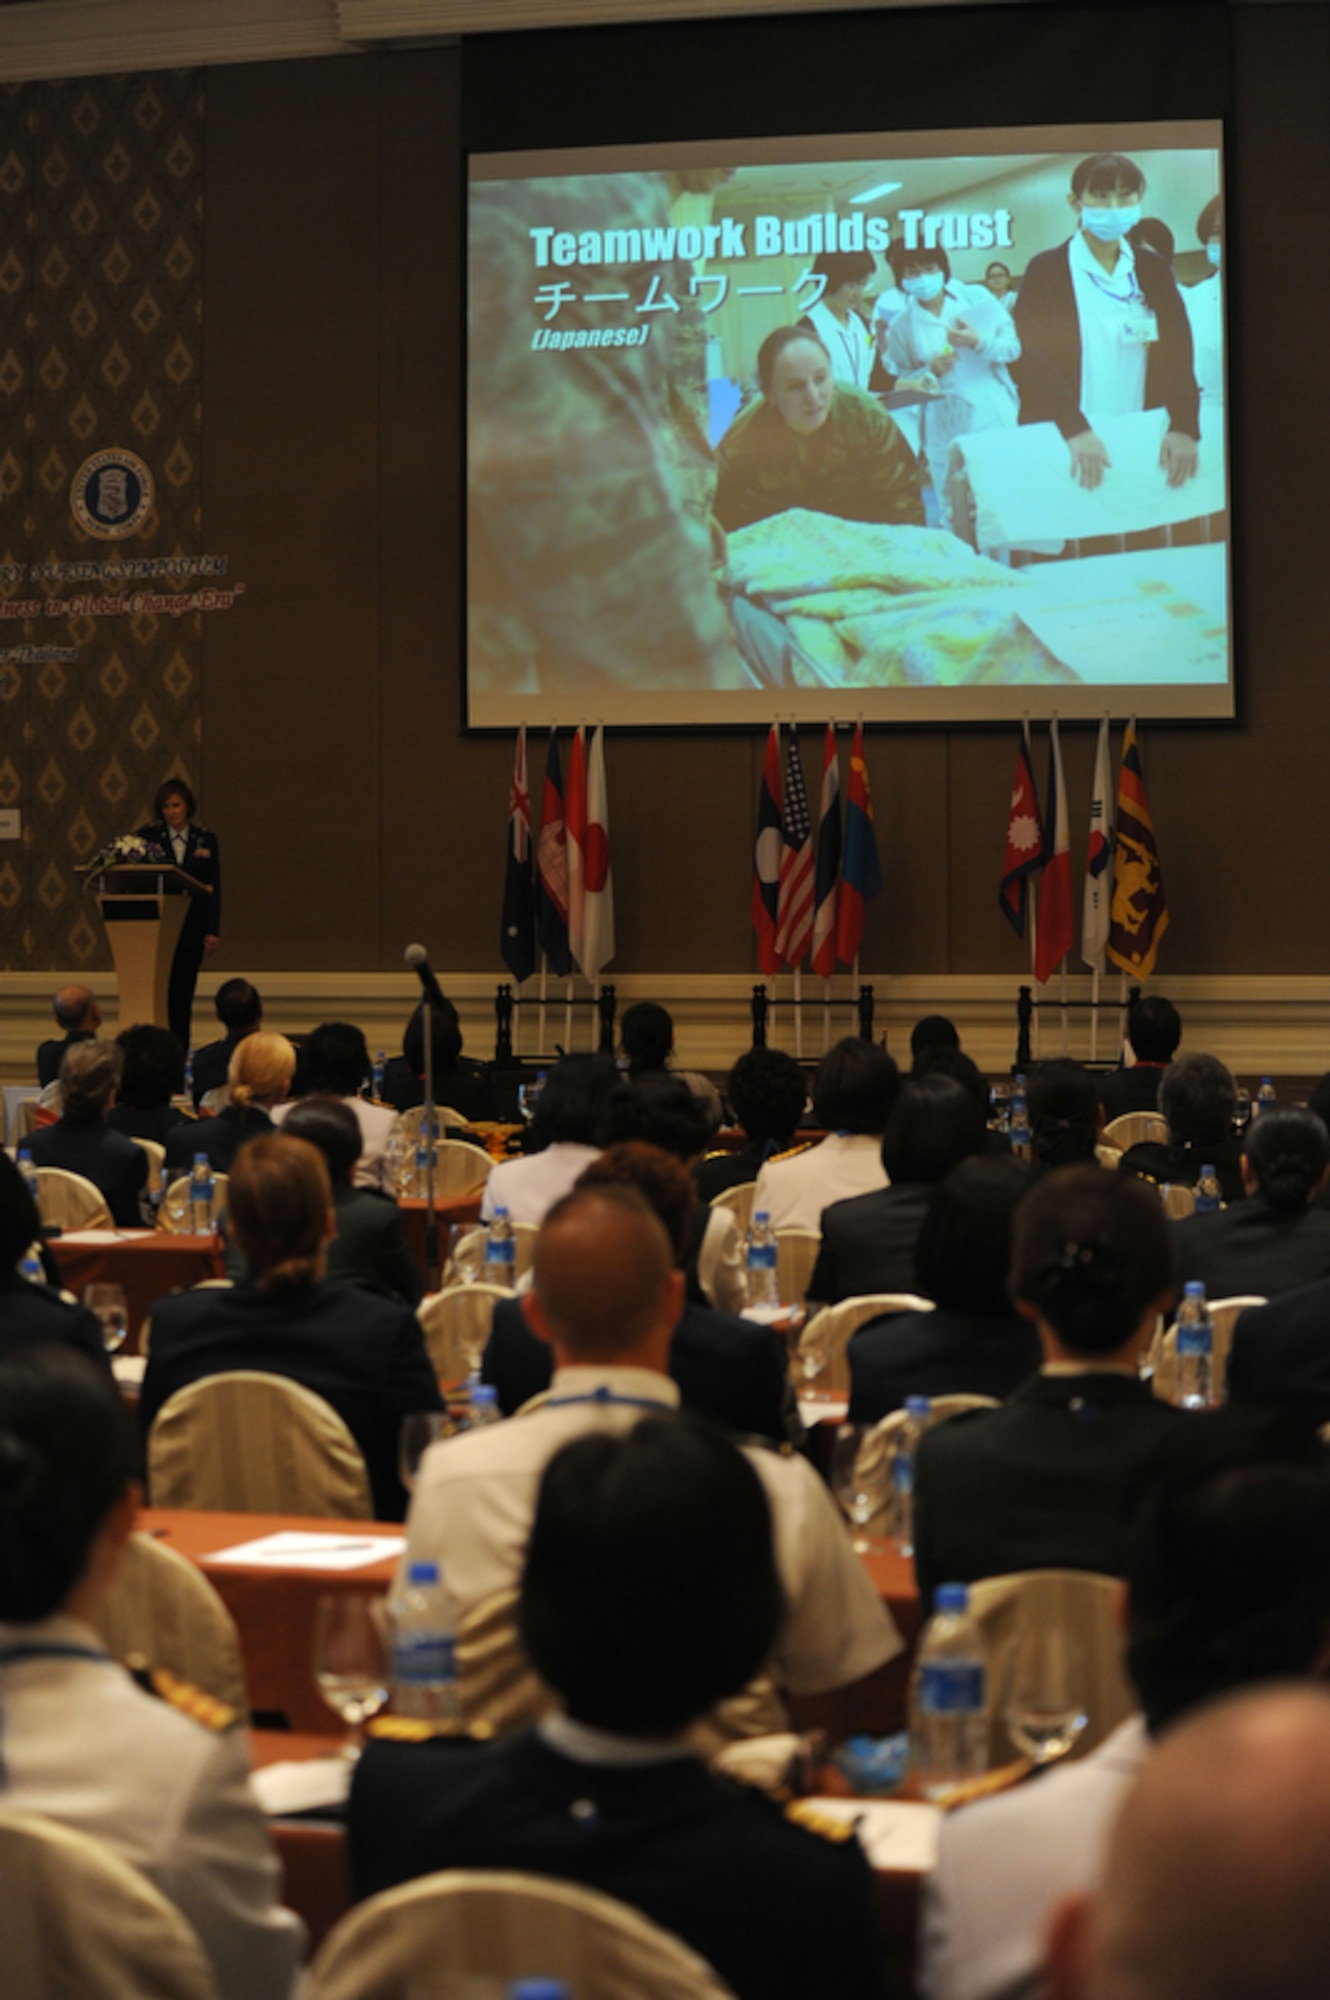 BANGKOK, Thailand - Members of the military nursing community in the Pacific religion watch a video illustrating examples of multilateral teamwork during disasters from previous years, while at the Pullman King Power Hotel in Bangkok Thailand on Aug. 1 for the start of the five-day 2011 Asia Pacific Military Nursing Symposium, which is sponsored by Pacific Command and executed under the direction of 13th Air Force.
This is the fifth year of the symposium, which started at Hickam Air force Base in 2007, and the first time that Thailand has hosted the event.
More than 12 countries from the Asia-Pacific region have come together to build on relationships by exchanging information and techniques with one another. (U.S.  Air Force photo/Master Sgt. Cohen A. Young)
